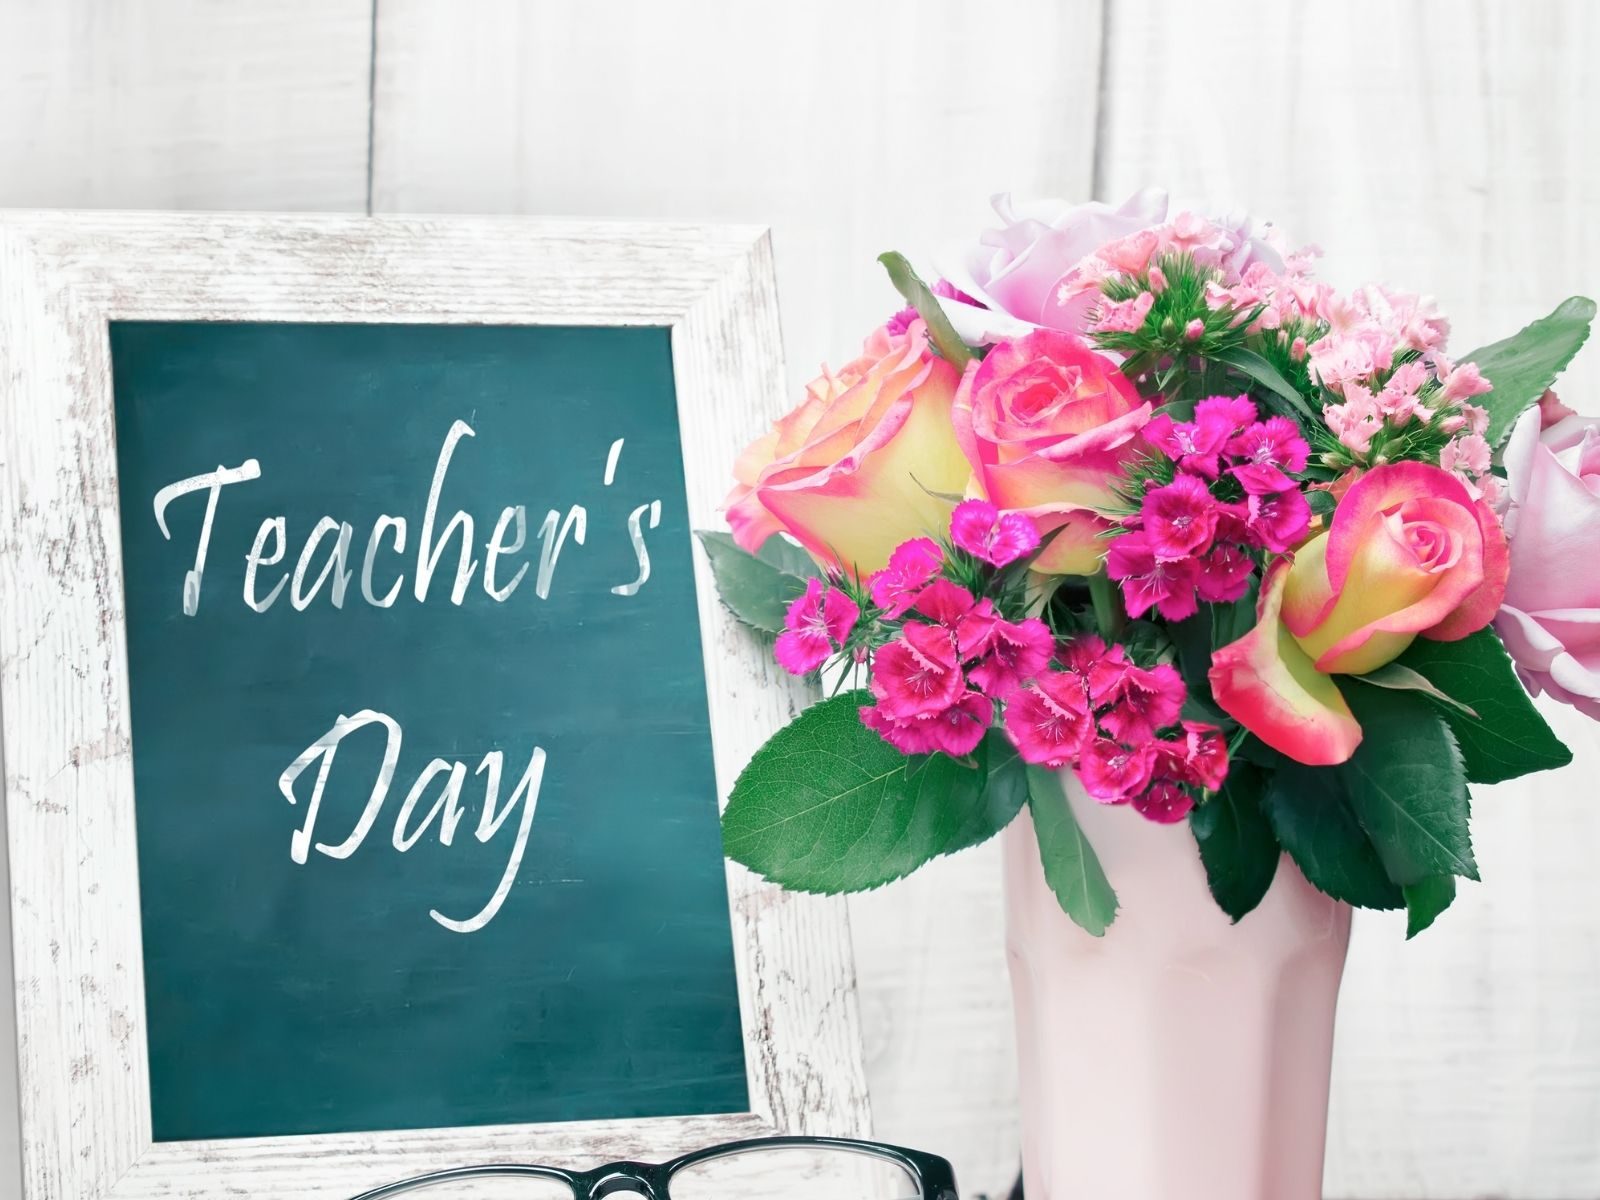 Happy Teachers' Day 2021: Image, Wishes and Quotes to Share with your Teachers